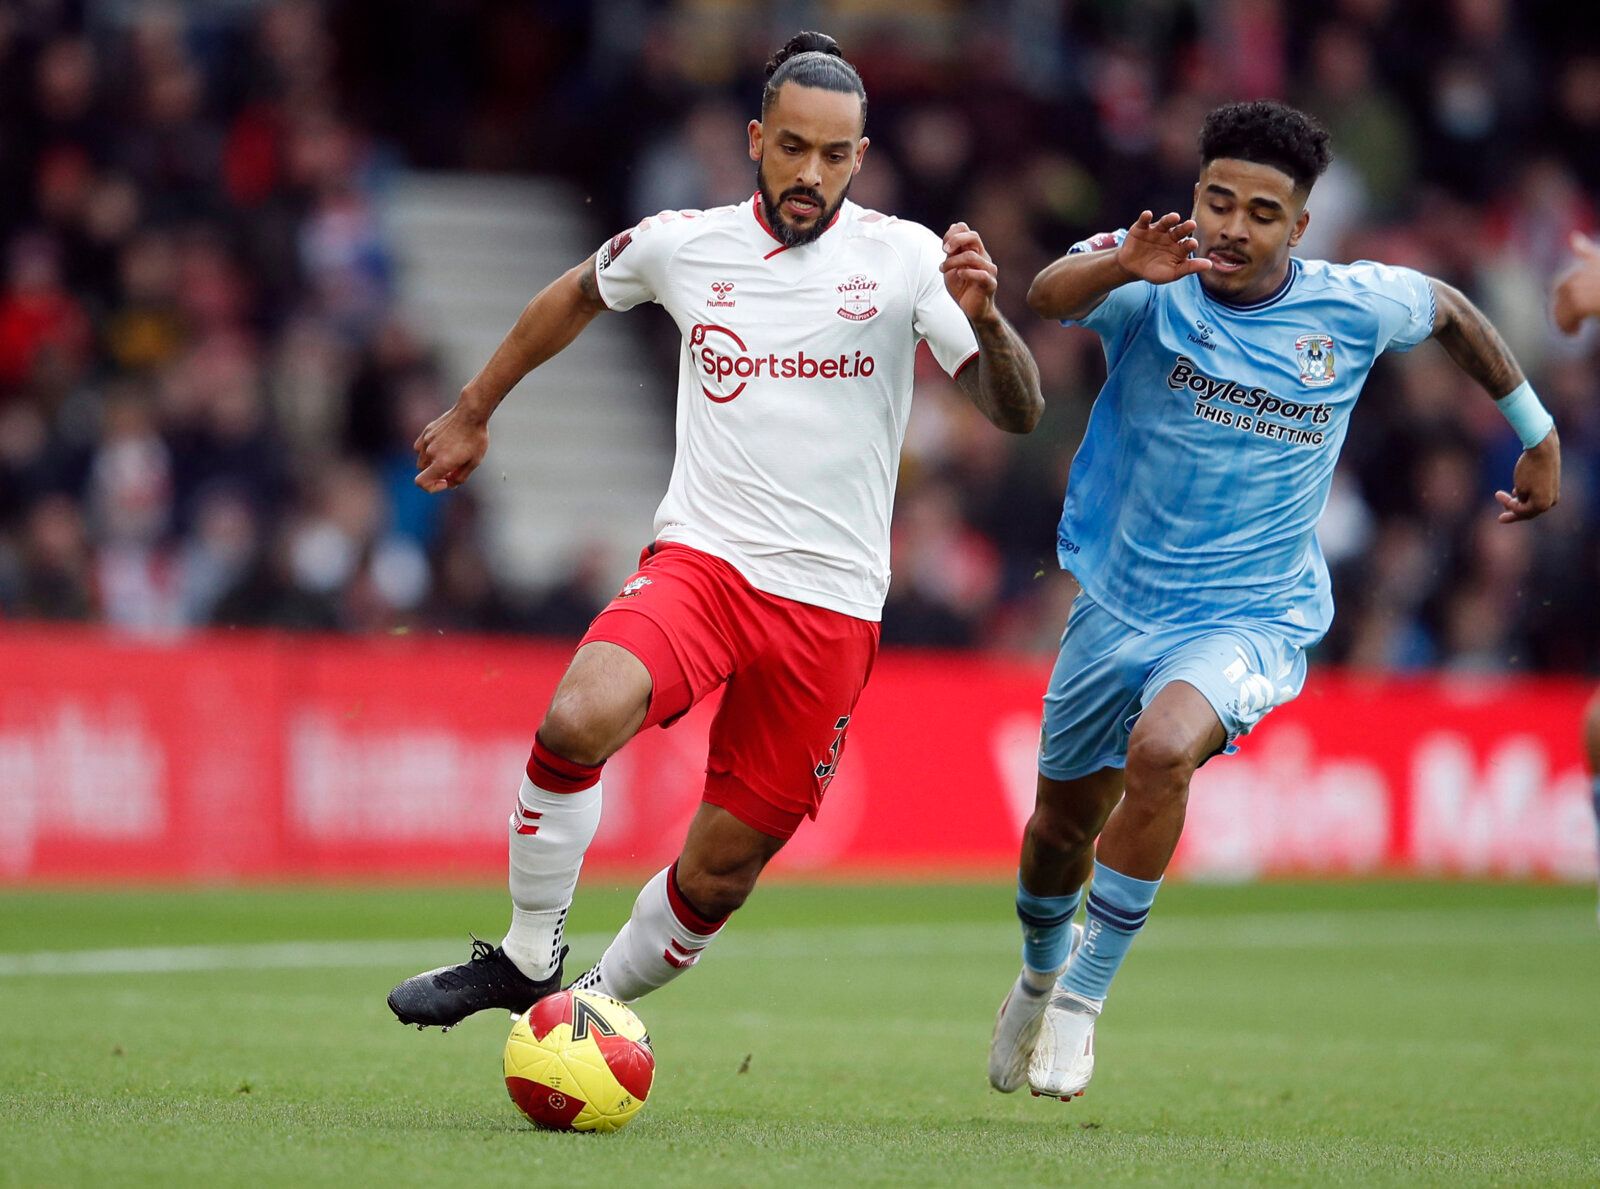 Soccer Football - FA Cup - Fourth Round - Southampton v Coventry City - St Mary's Stadium, Southampton, Britain - February 5, 2022 Southampton's Theo Walcott in action with Coventry City's Ian Maatsen REUTERS/Peter Nicholls